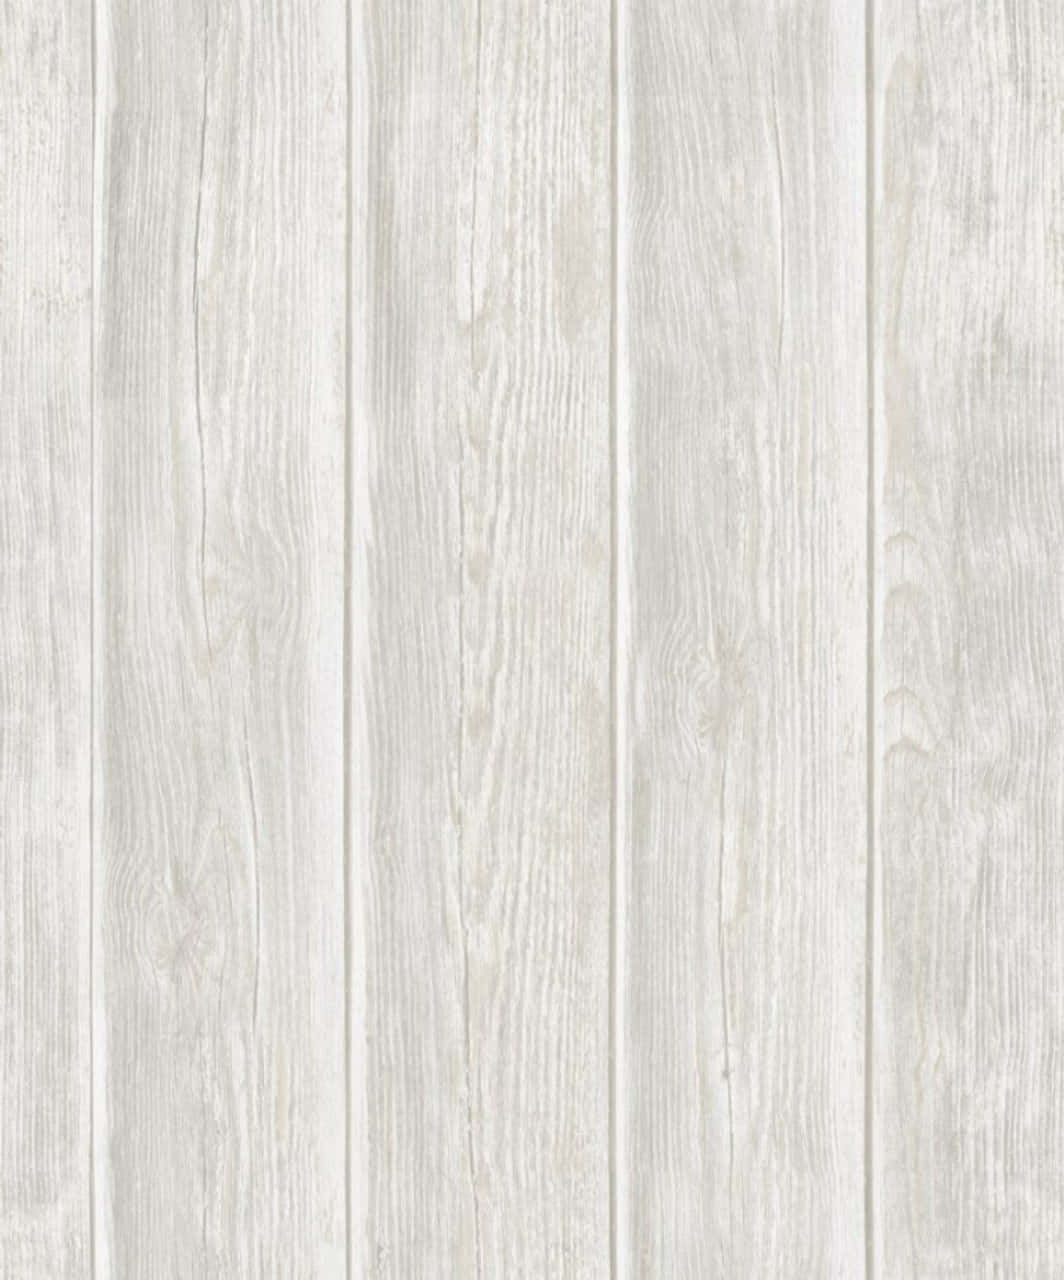 Create a timeless, cozy look with shiplap.